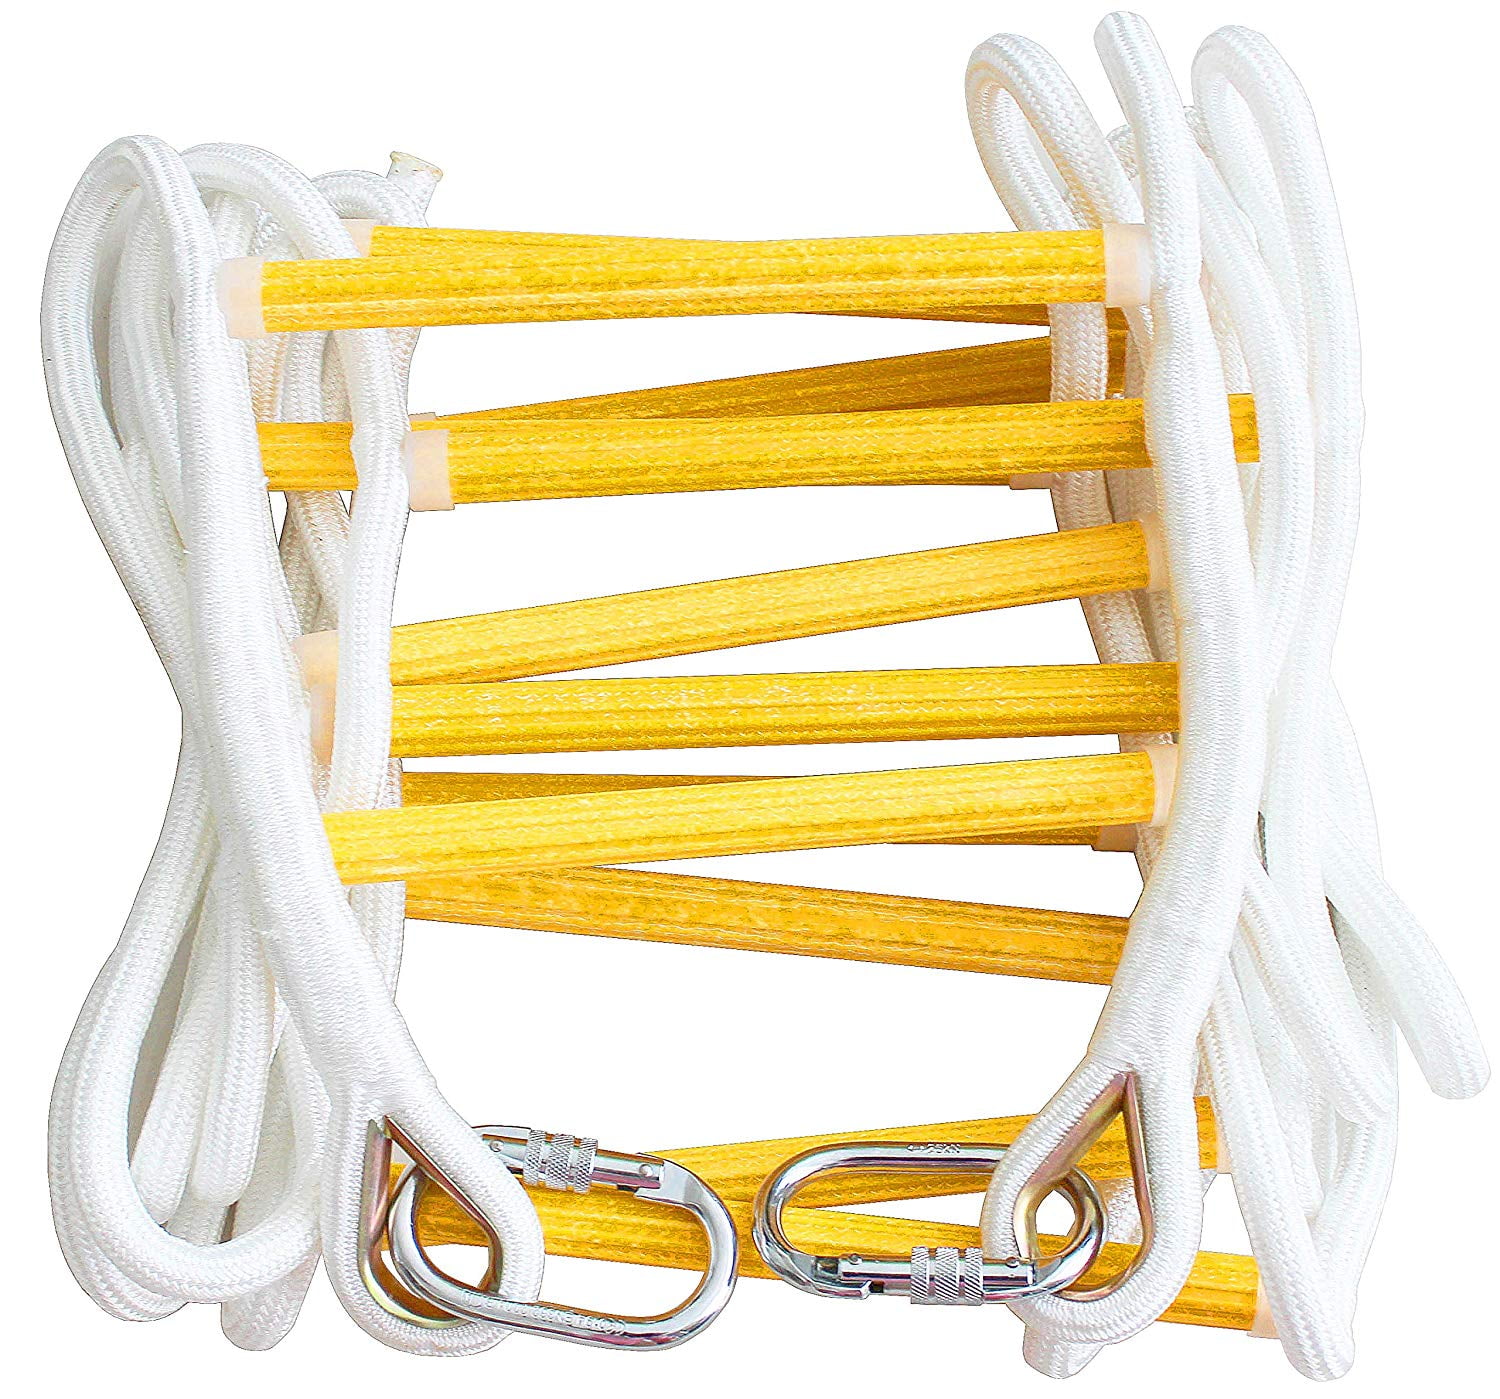 ISOP USA Emergency Fire Escape Rope Ladder 16 Ft (2 Story) with Carabiners  - Weight Capacity Up To 2000 Pounds 